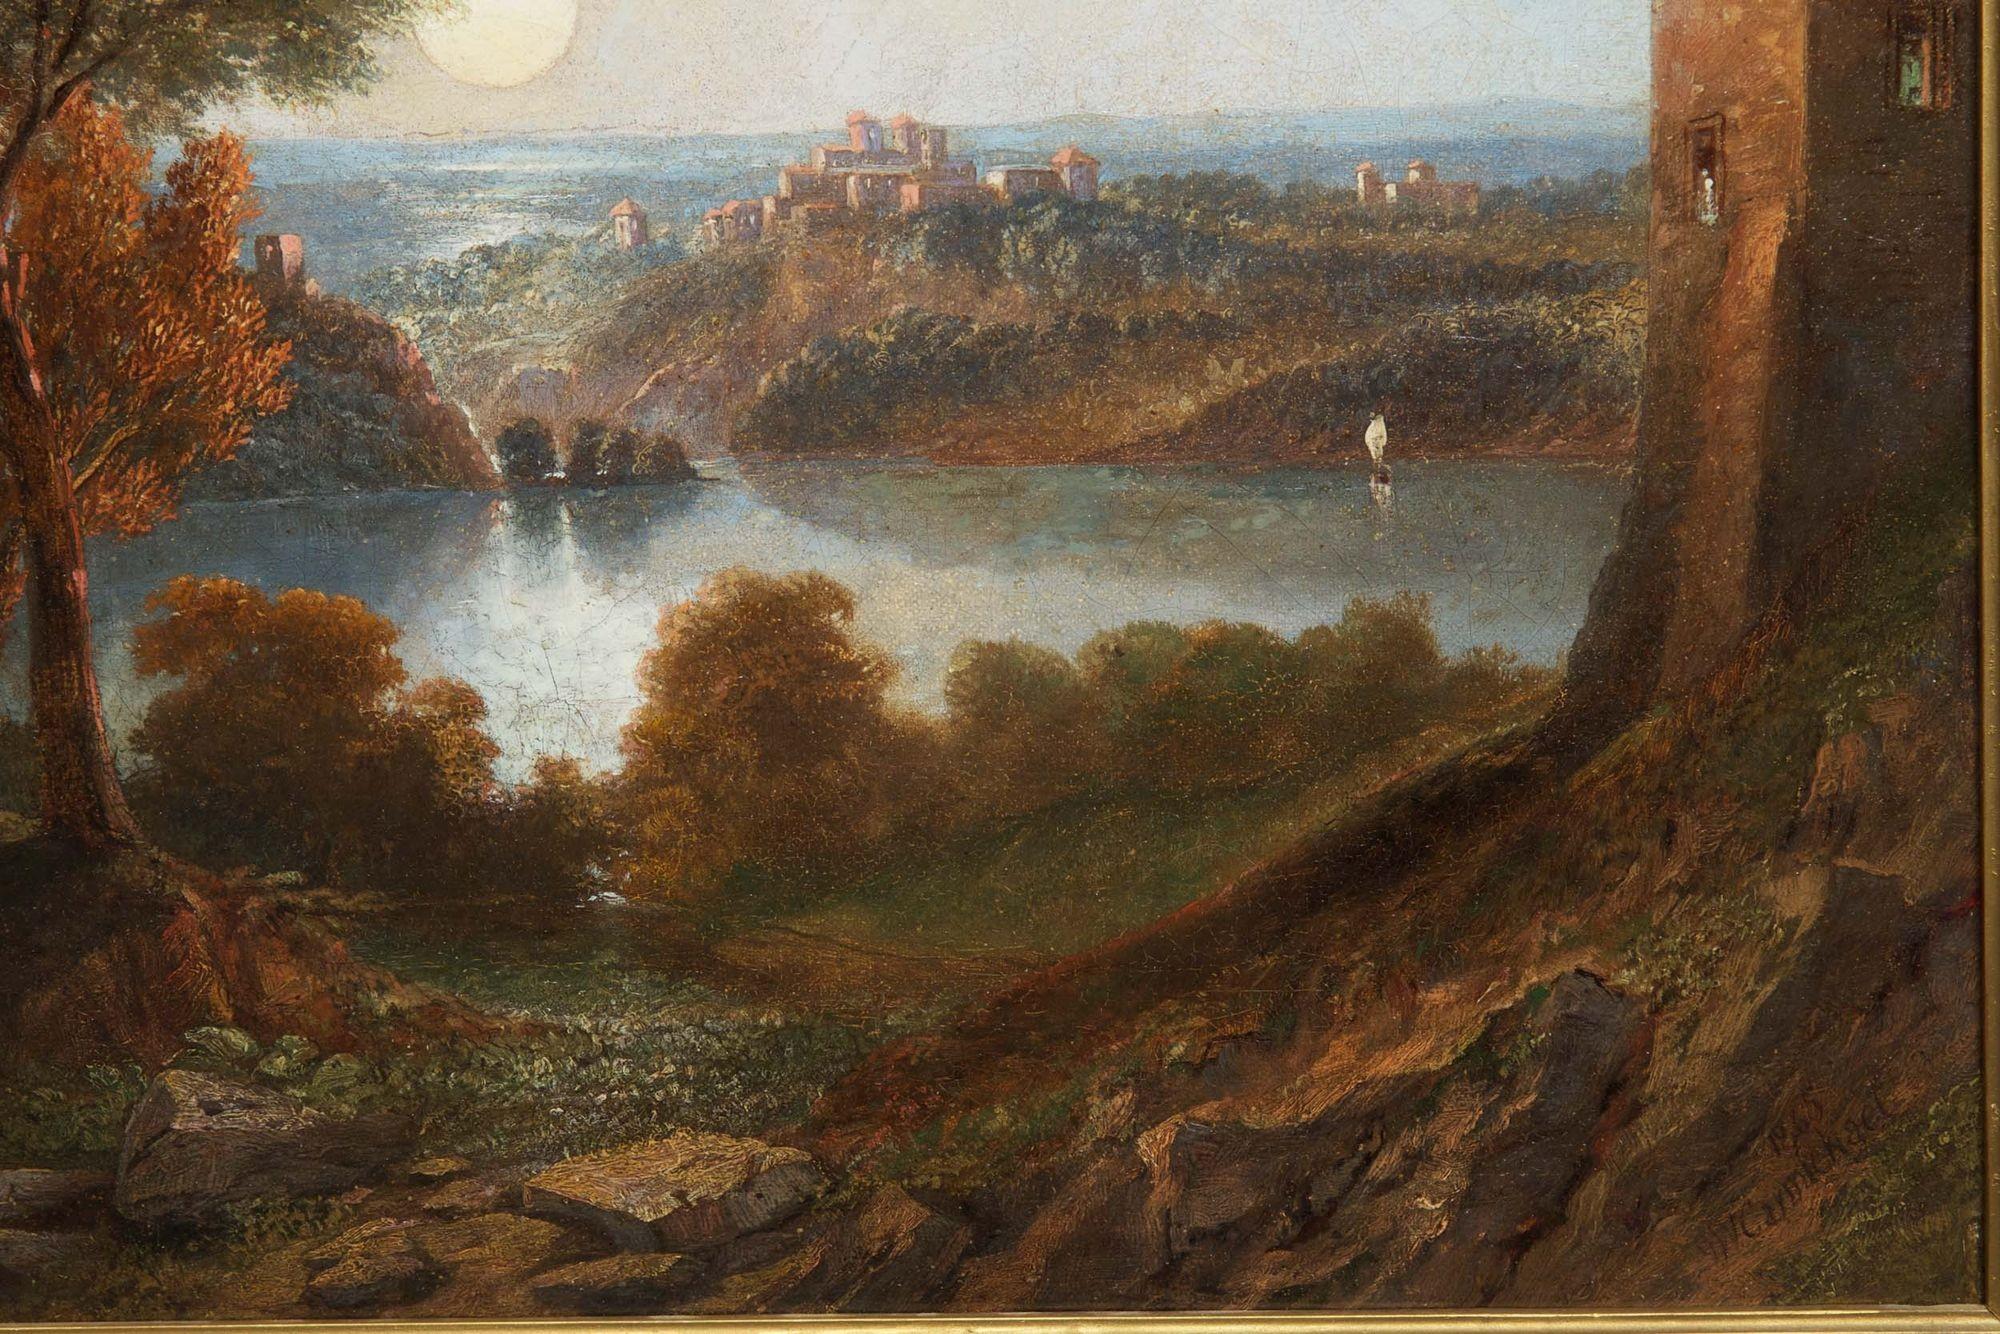 Antique English Painting “Lake Nemi, Italy” '1865' by John Wilson Carmichael In Good Condition For Sale In Shippensburg, PA